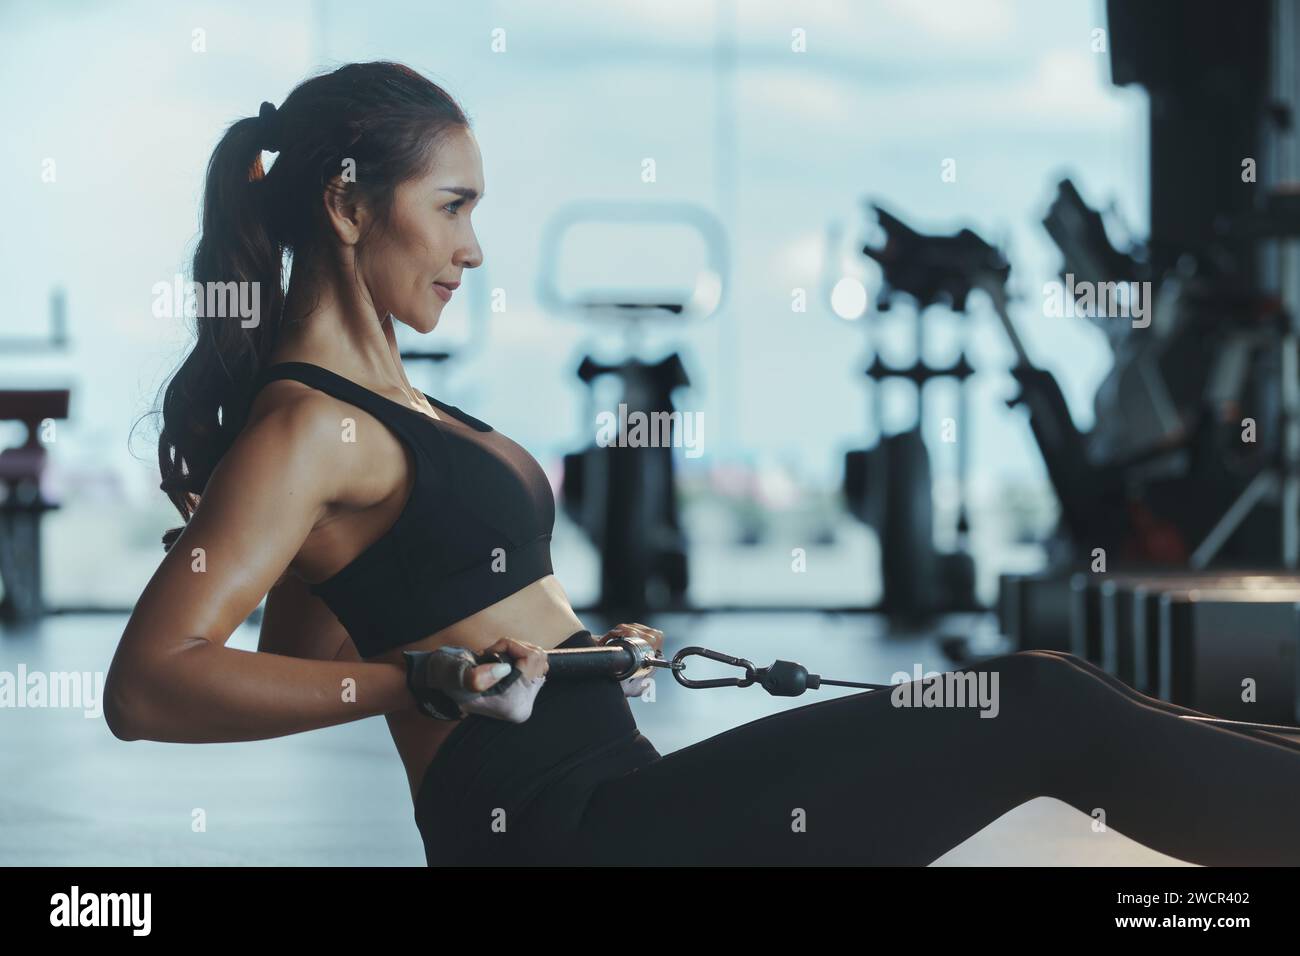 Sporty woman exercising on multistation at gym for arm and shoulders muscles. Fitness exercising in gym. Stock Photo